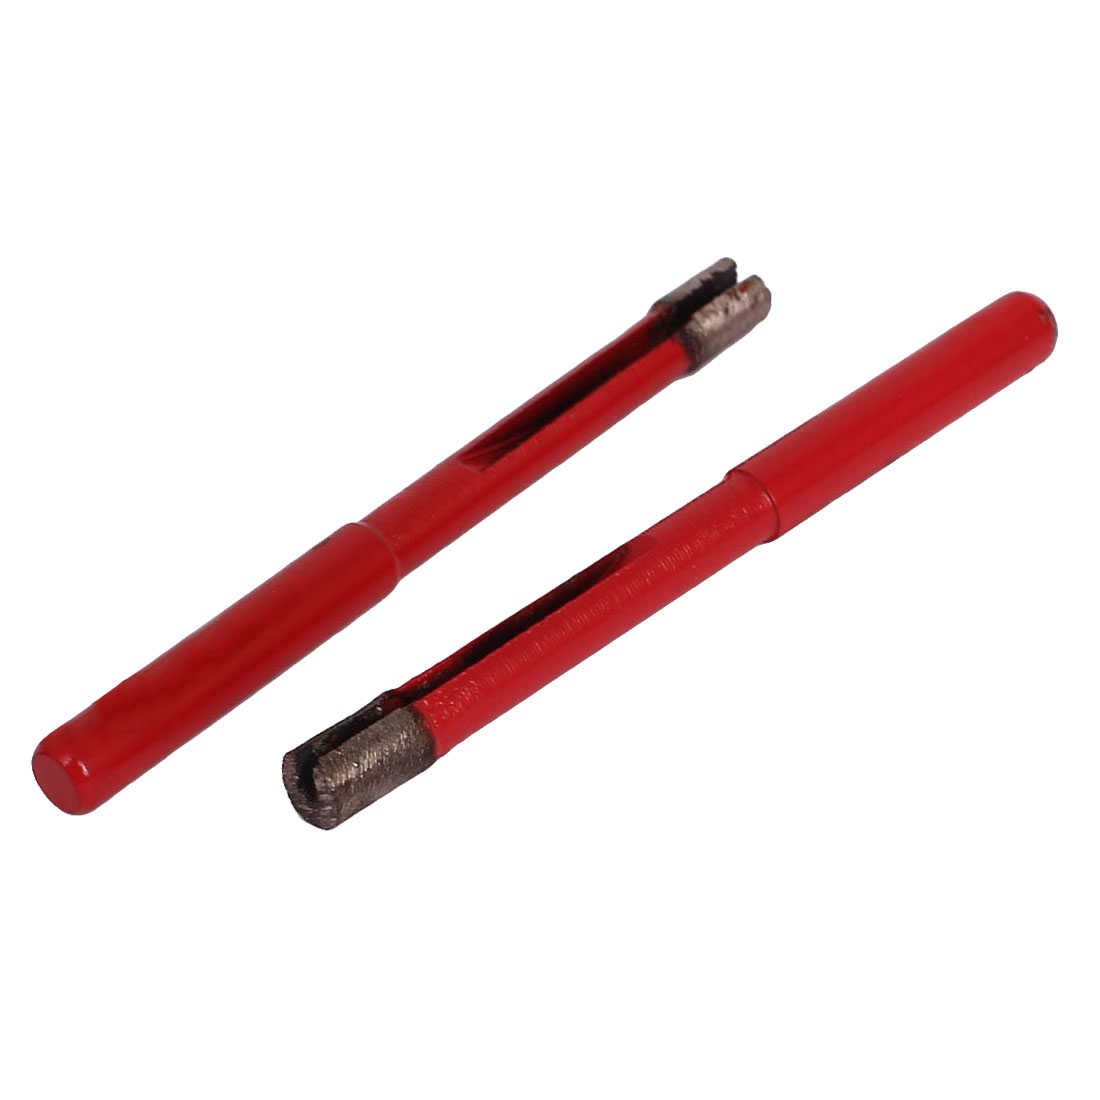 6mm Dia Sintering Coated Tool Tile Tiling Marble Granite Glass Hole Saw Red 2pcs